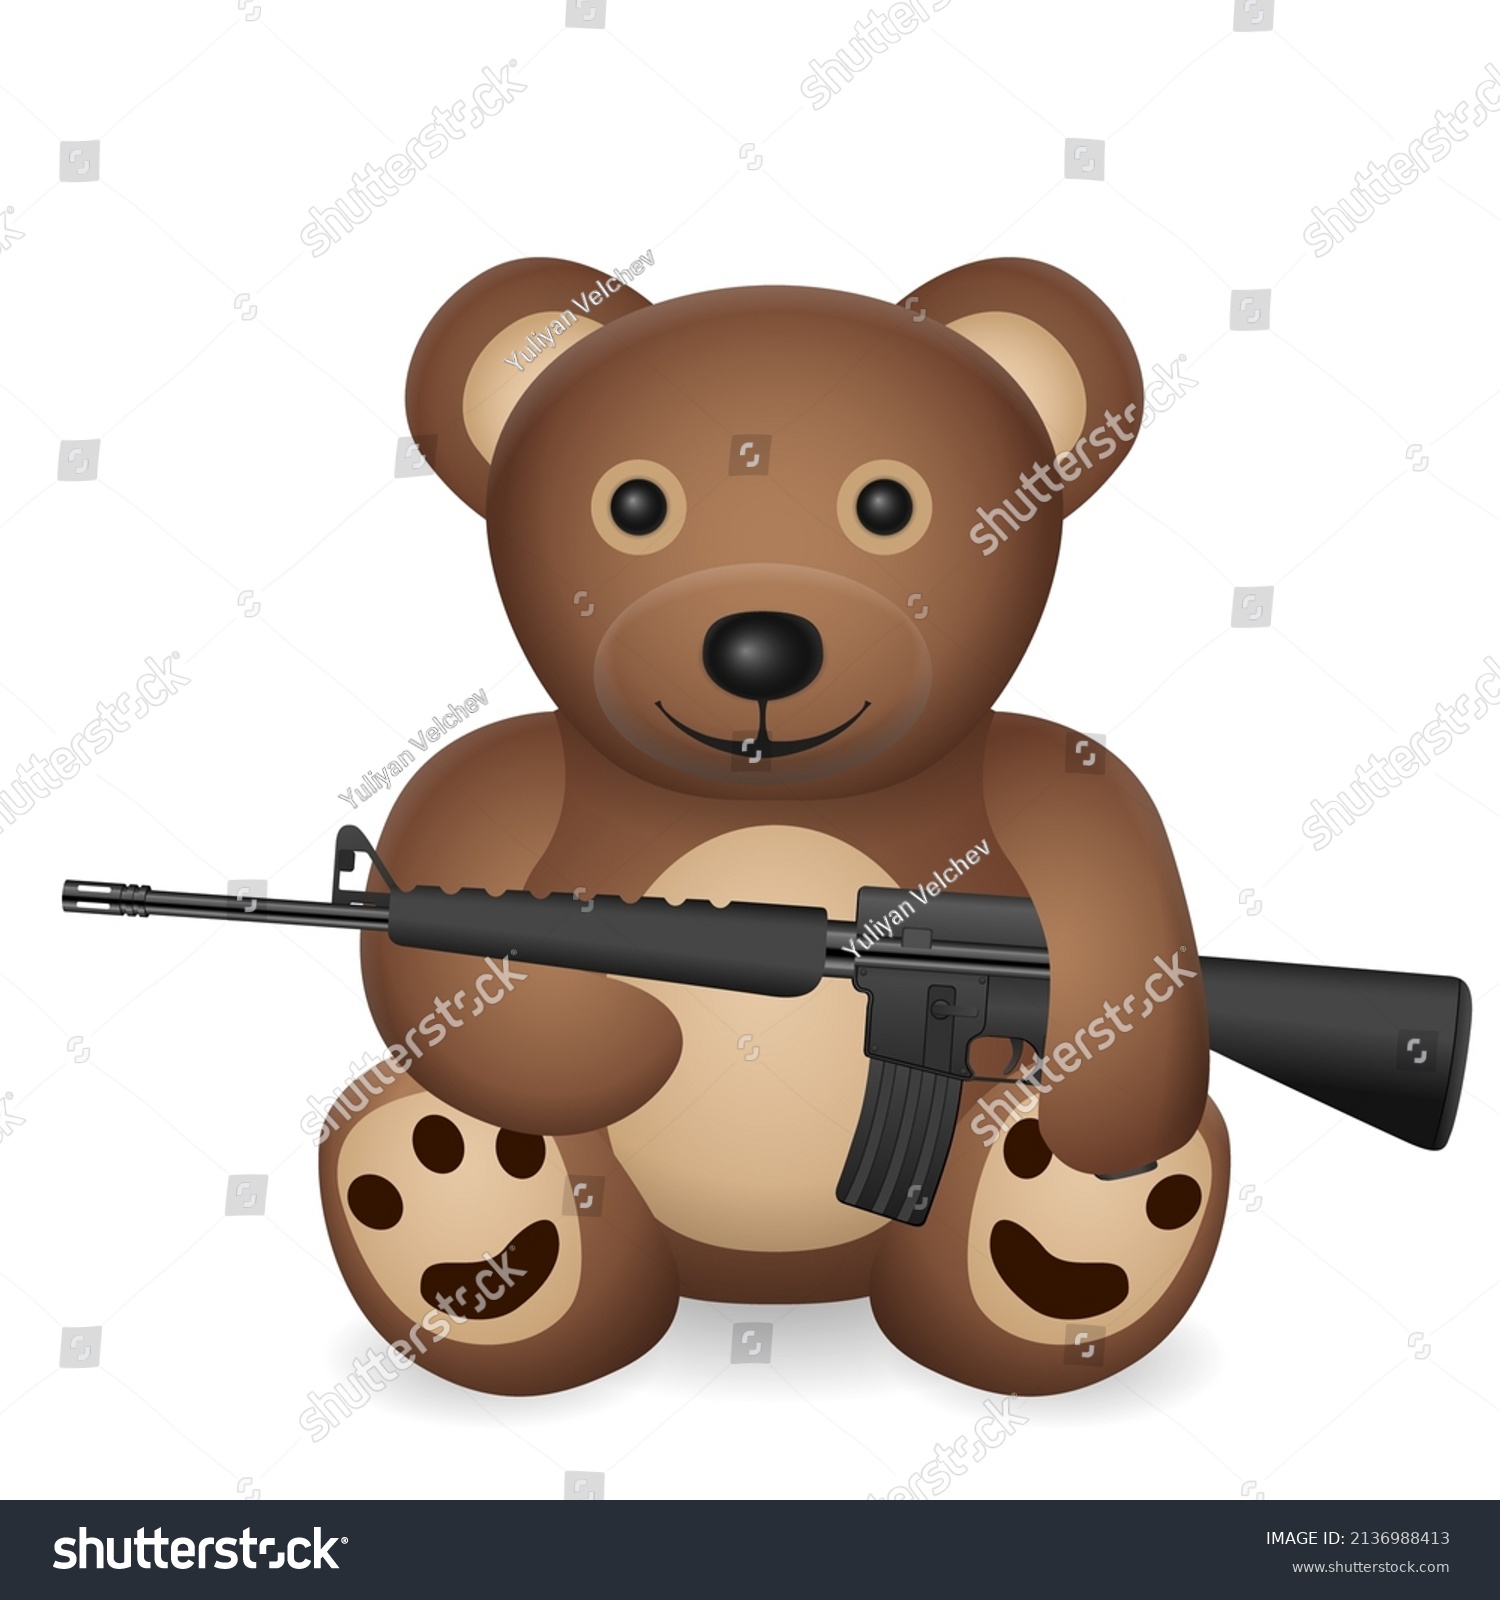 Teddy Bear M16 On White Background Stock Vector (Royalty Free ...